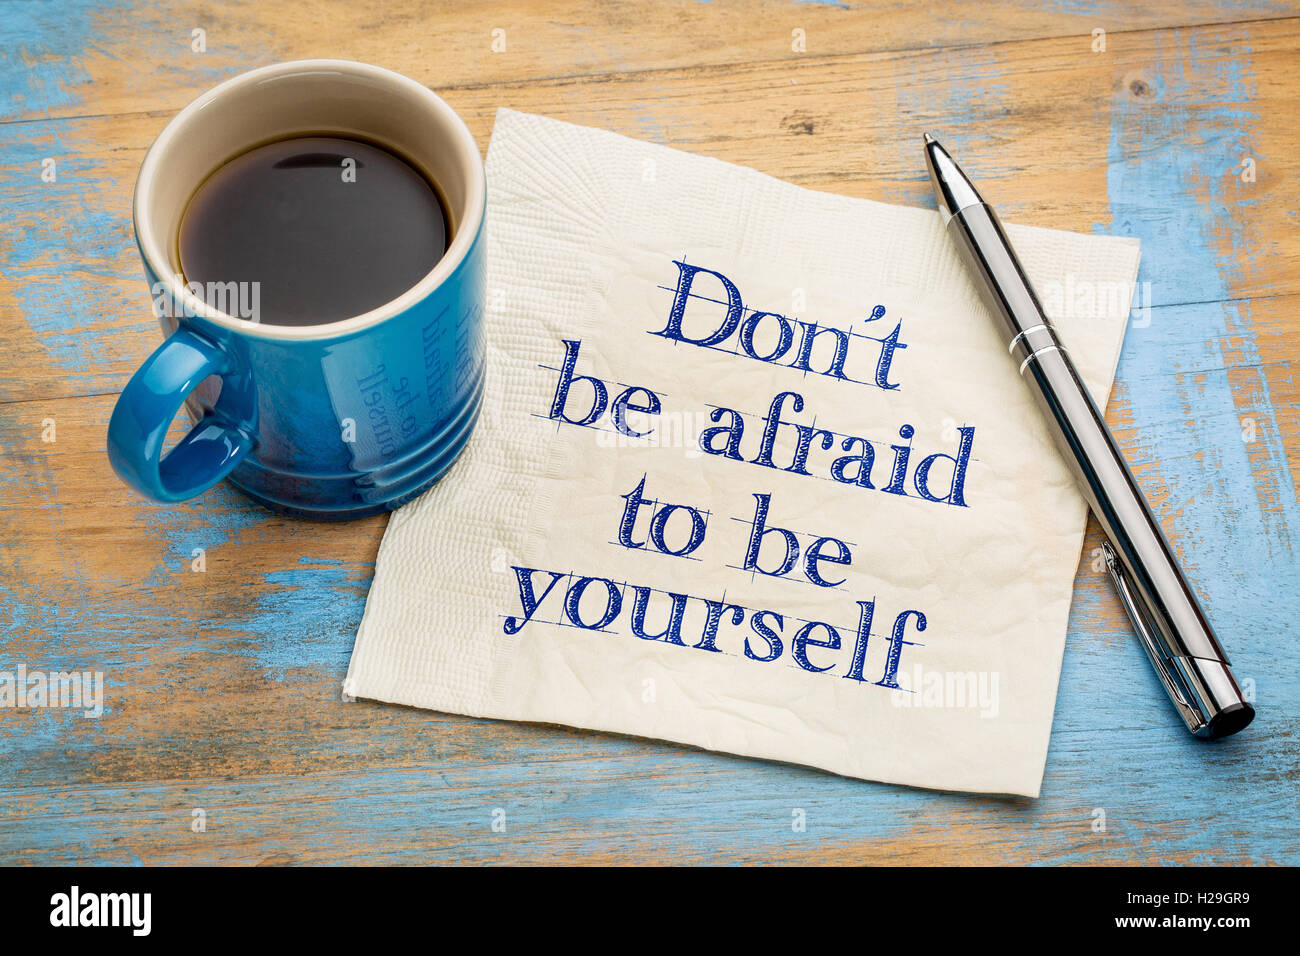 Don't be afraid to be yourself - handwriting on a napkin with a cup of espresso coffee Stock Photo